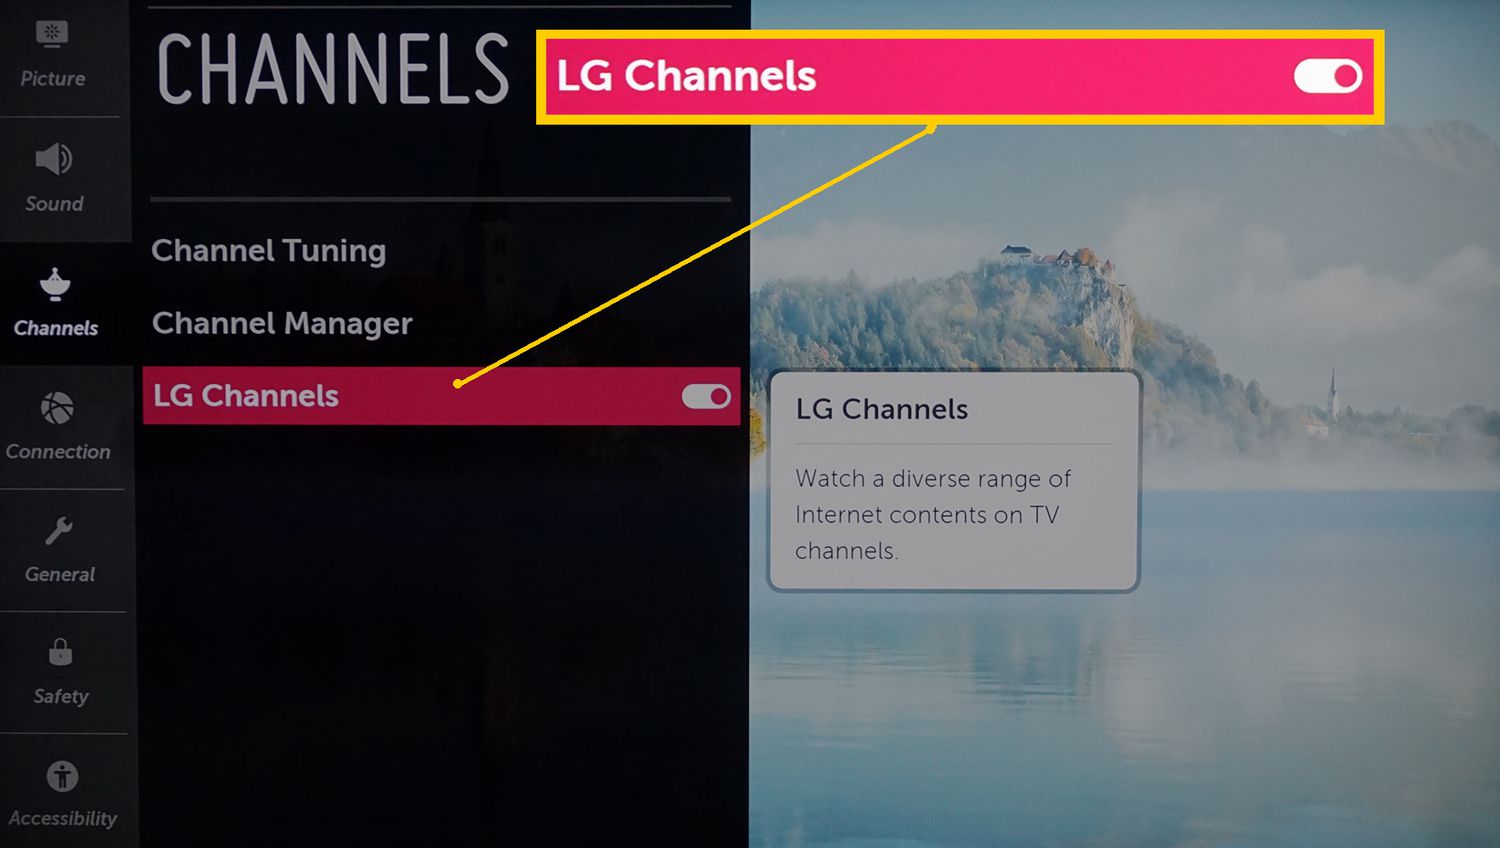 How To Add A Channel On LG Smart TV